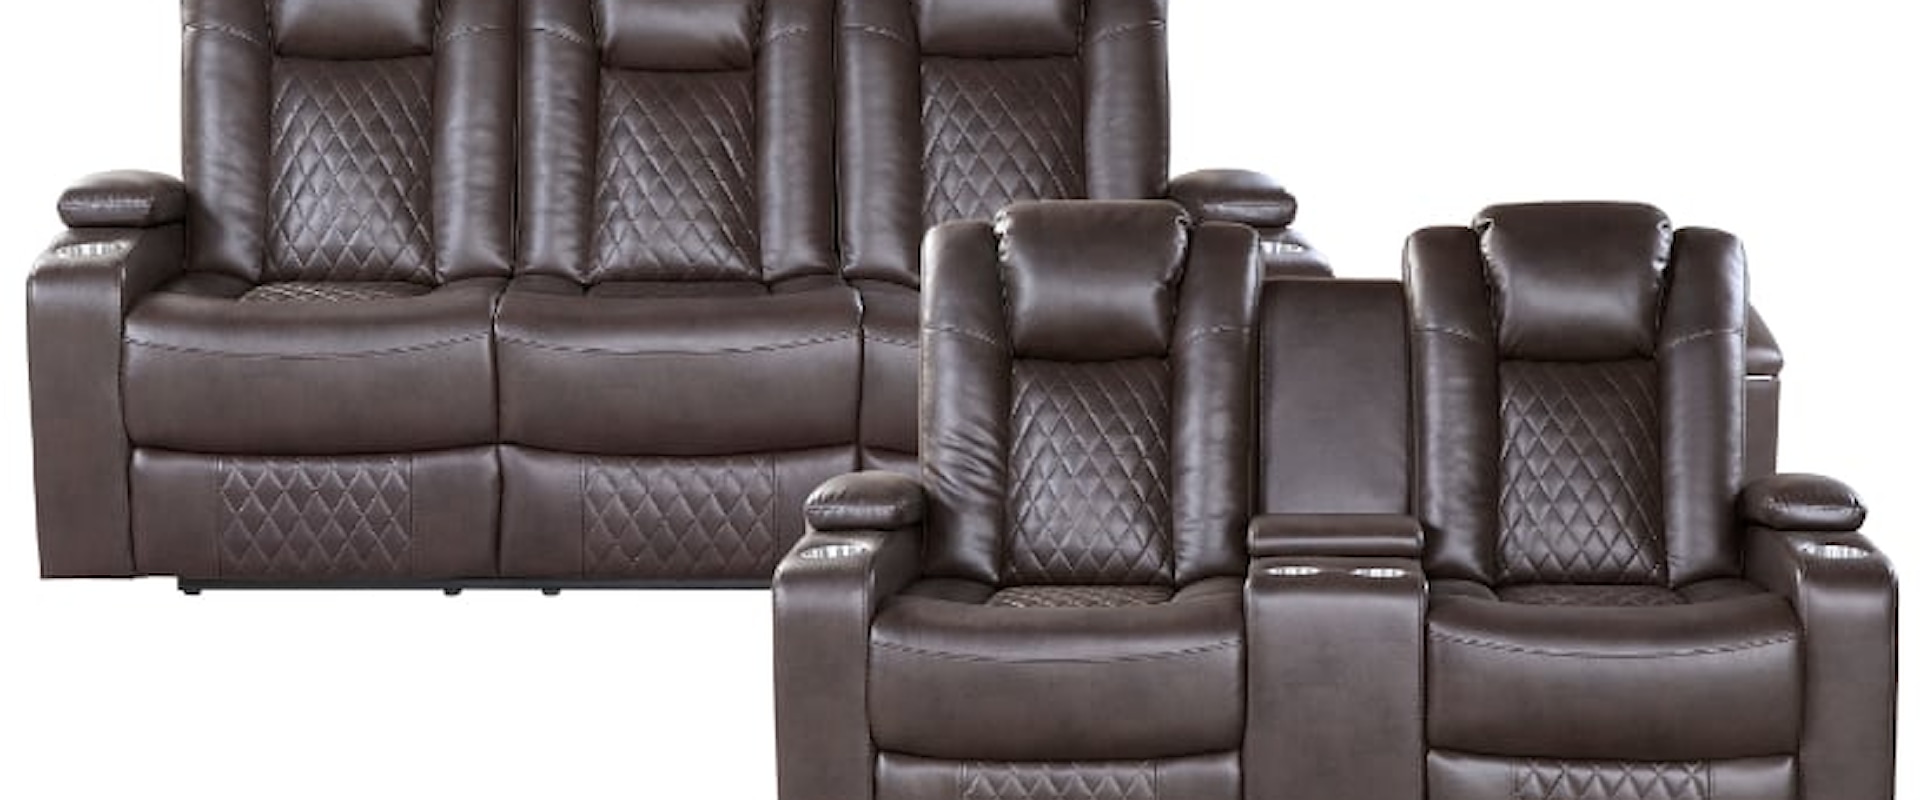 Casual 2-Piece Reclining Living Room Set with Cup Holders and Storage Arms